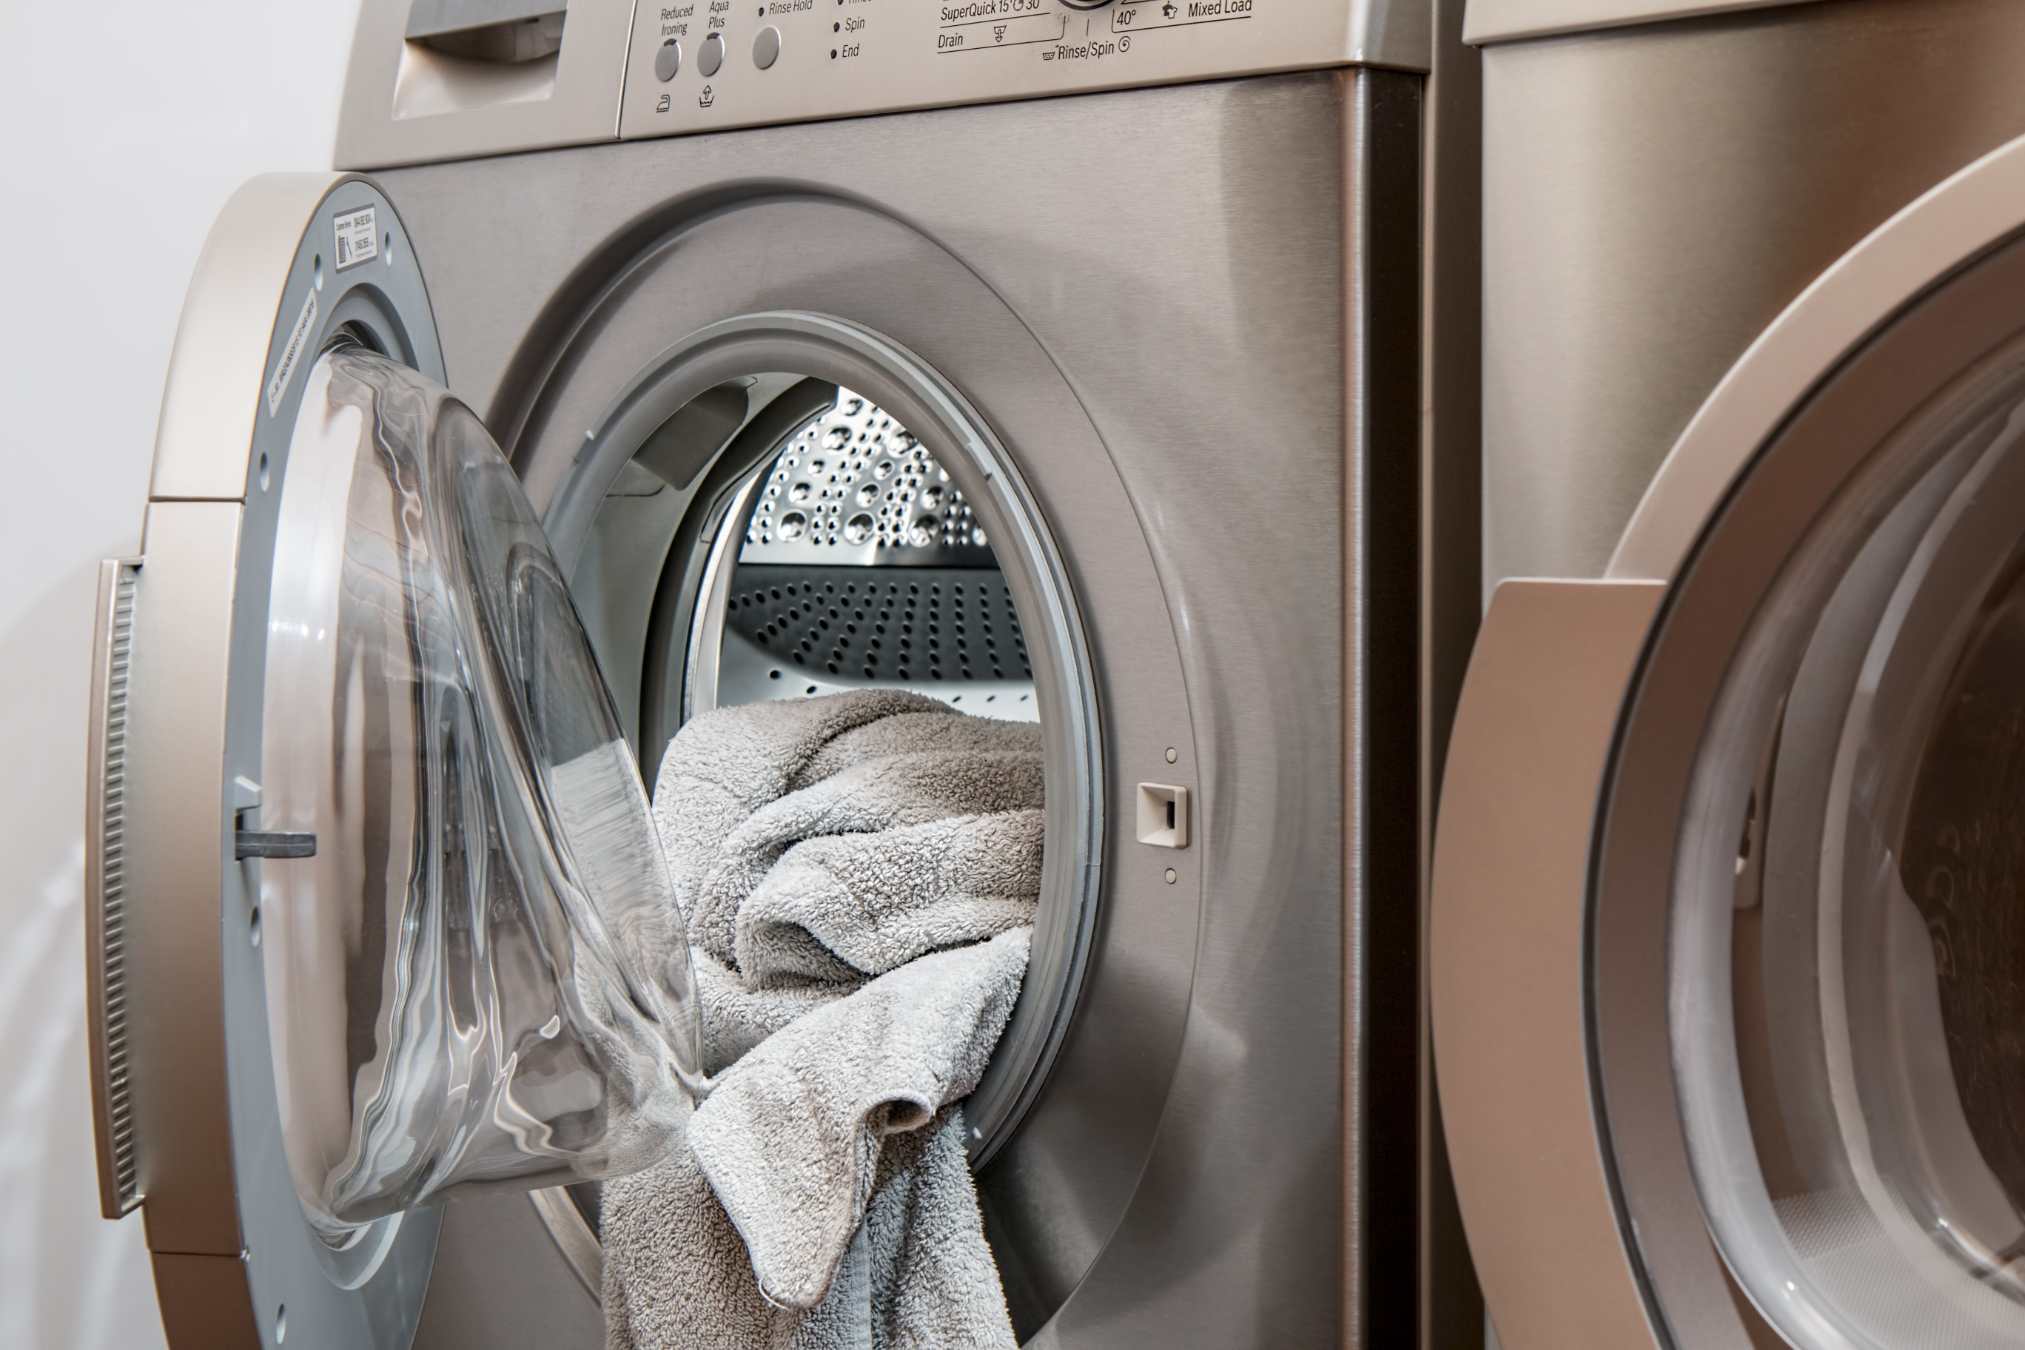 Frugal Home Project's Laundry Secrets: A Cost-Efficient Guide to Washing Your Clothes